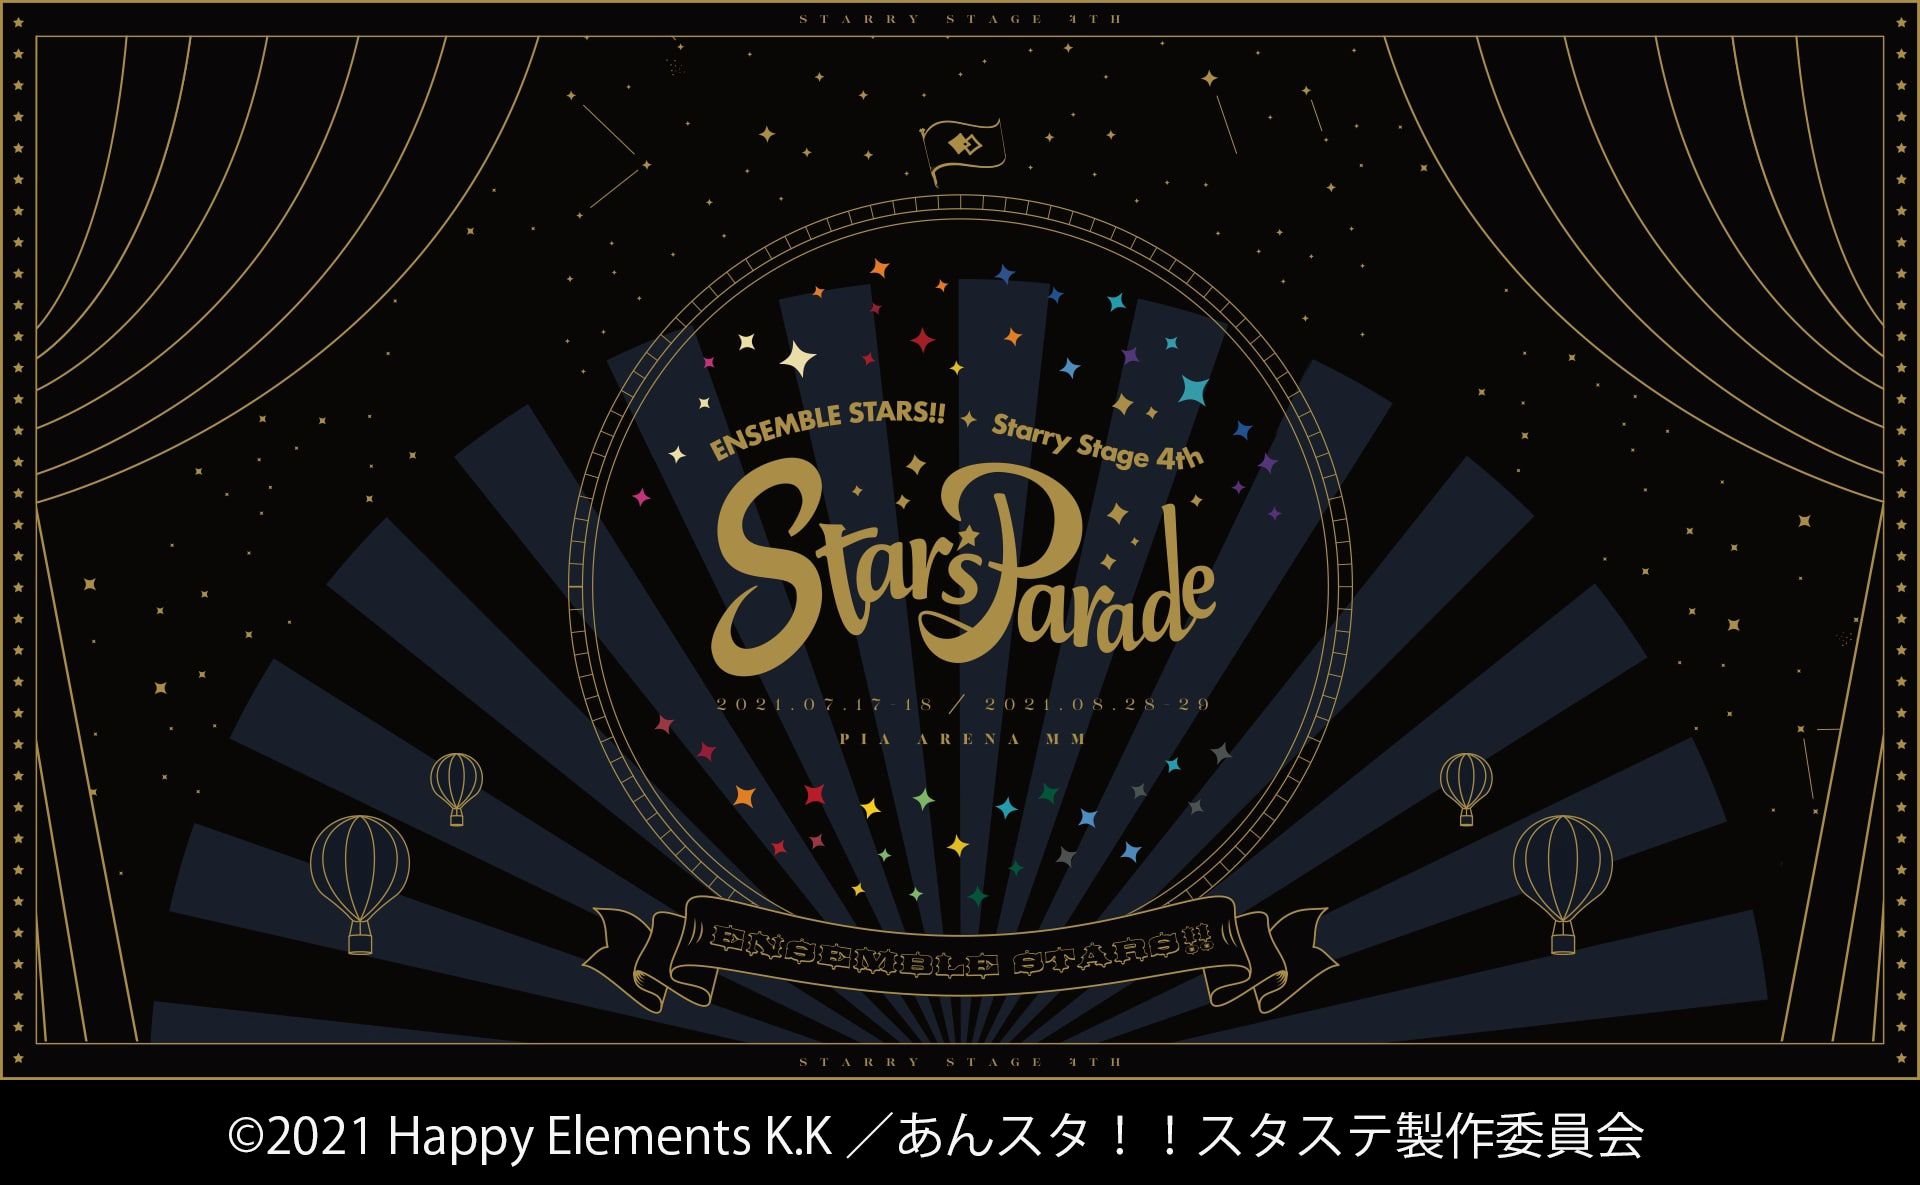 [Streaming+] ENSEMBLE STARS!! Starry Stage 4th star's parade